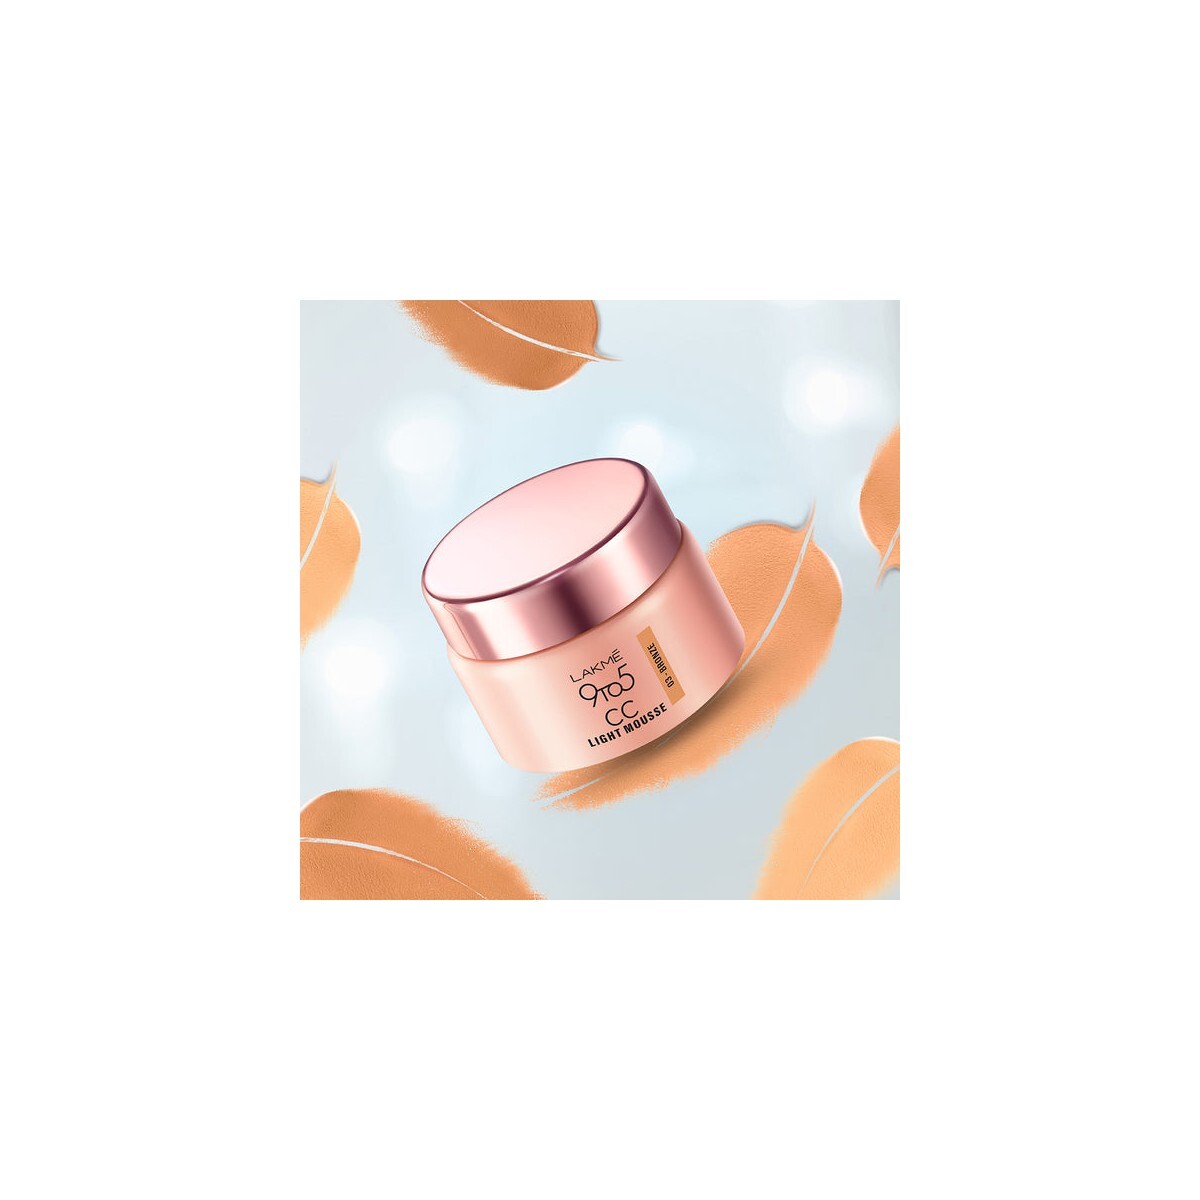 Lakme 9to5 CC Light Mousse with Vitamin E & a Hint of Foundation , Matte finish, Non-Comedogenic, lightweight mousse foundation, 25gm , Brown